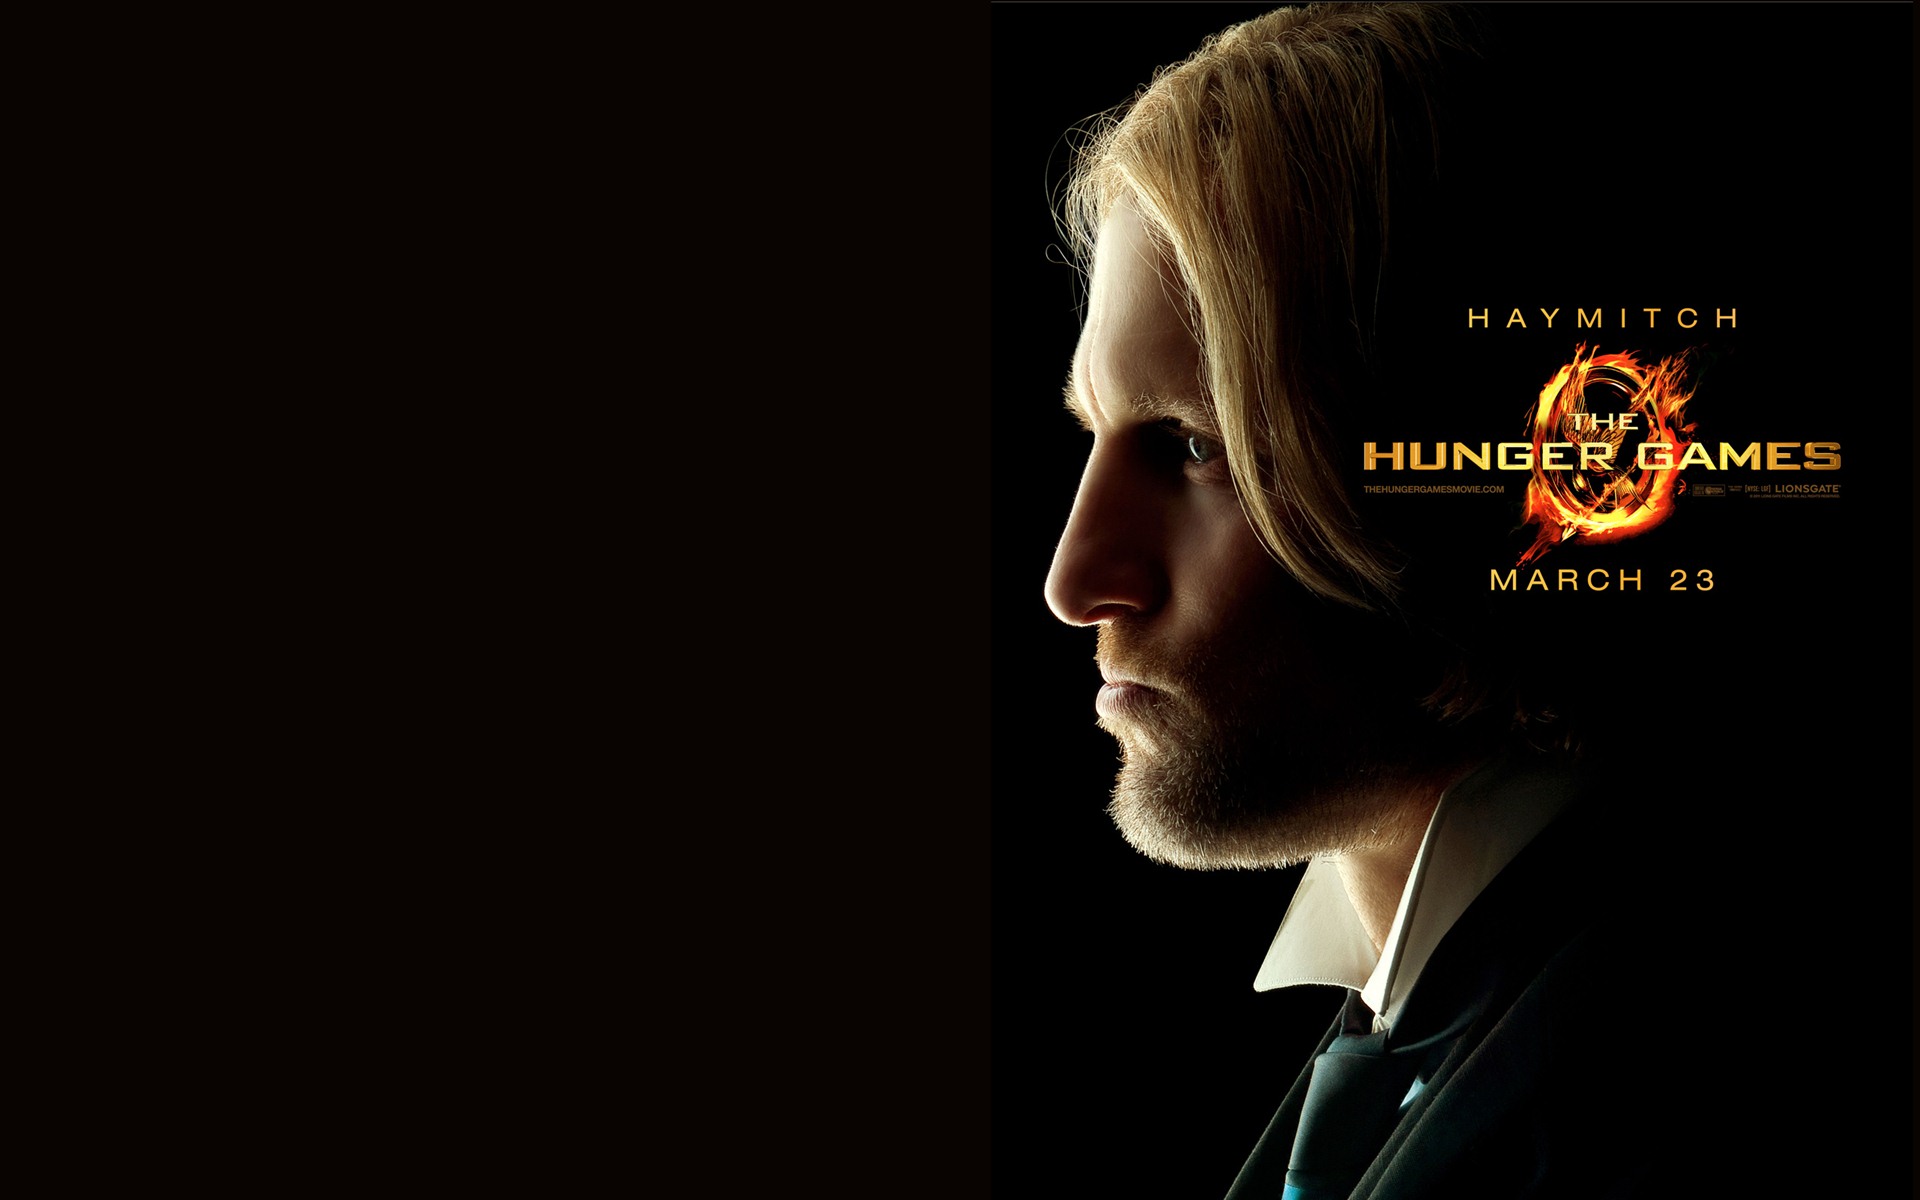 The Hunger Games HD wallpapers #12 - 1920x1200